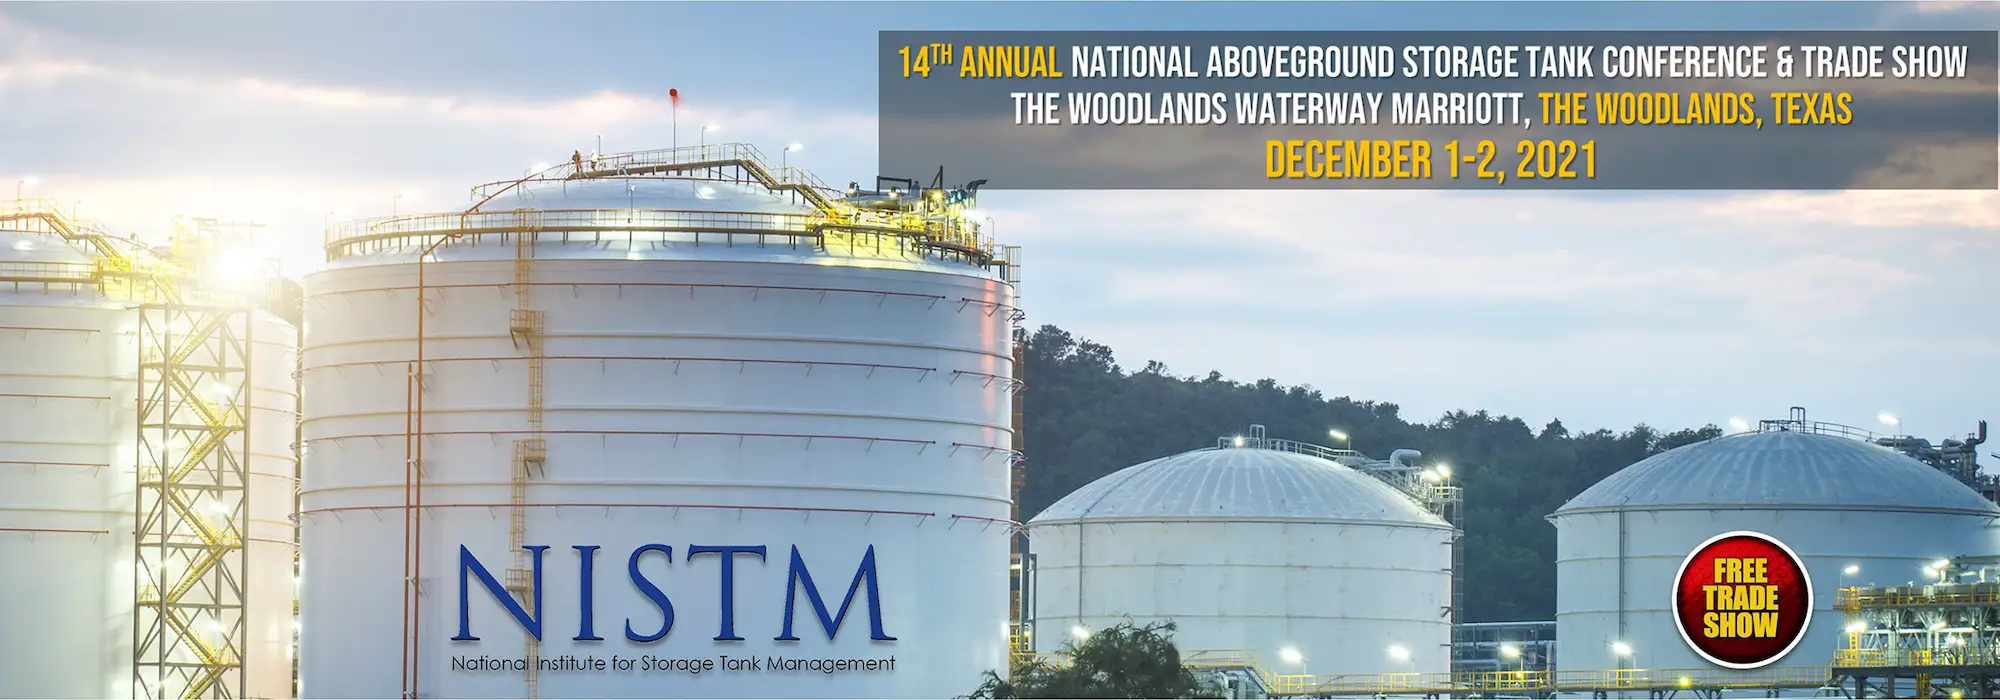 Weston and Associates will be showcasing at the 14th Annual NISTM tradeshow featured image